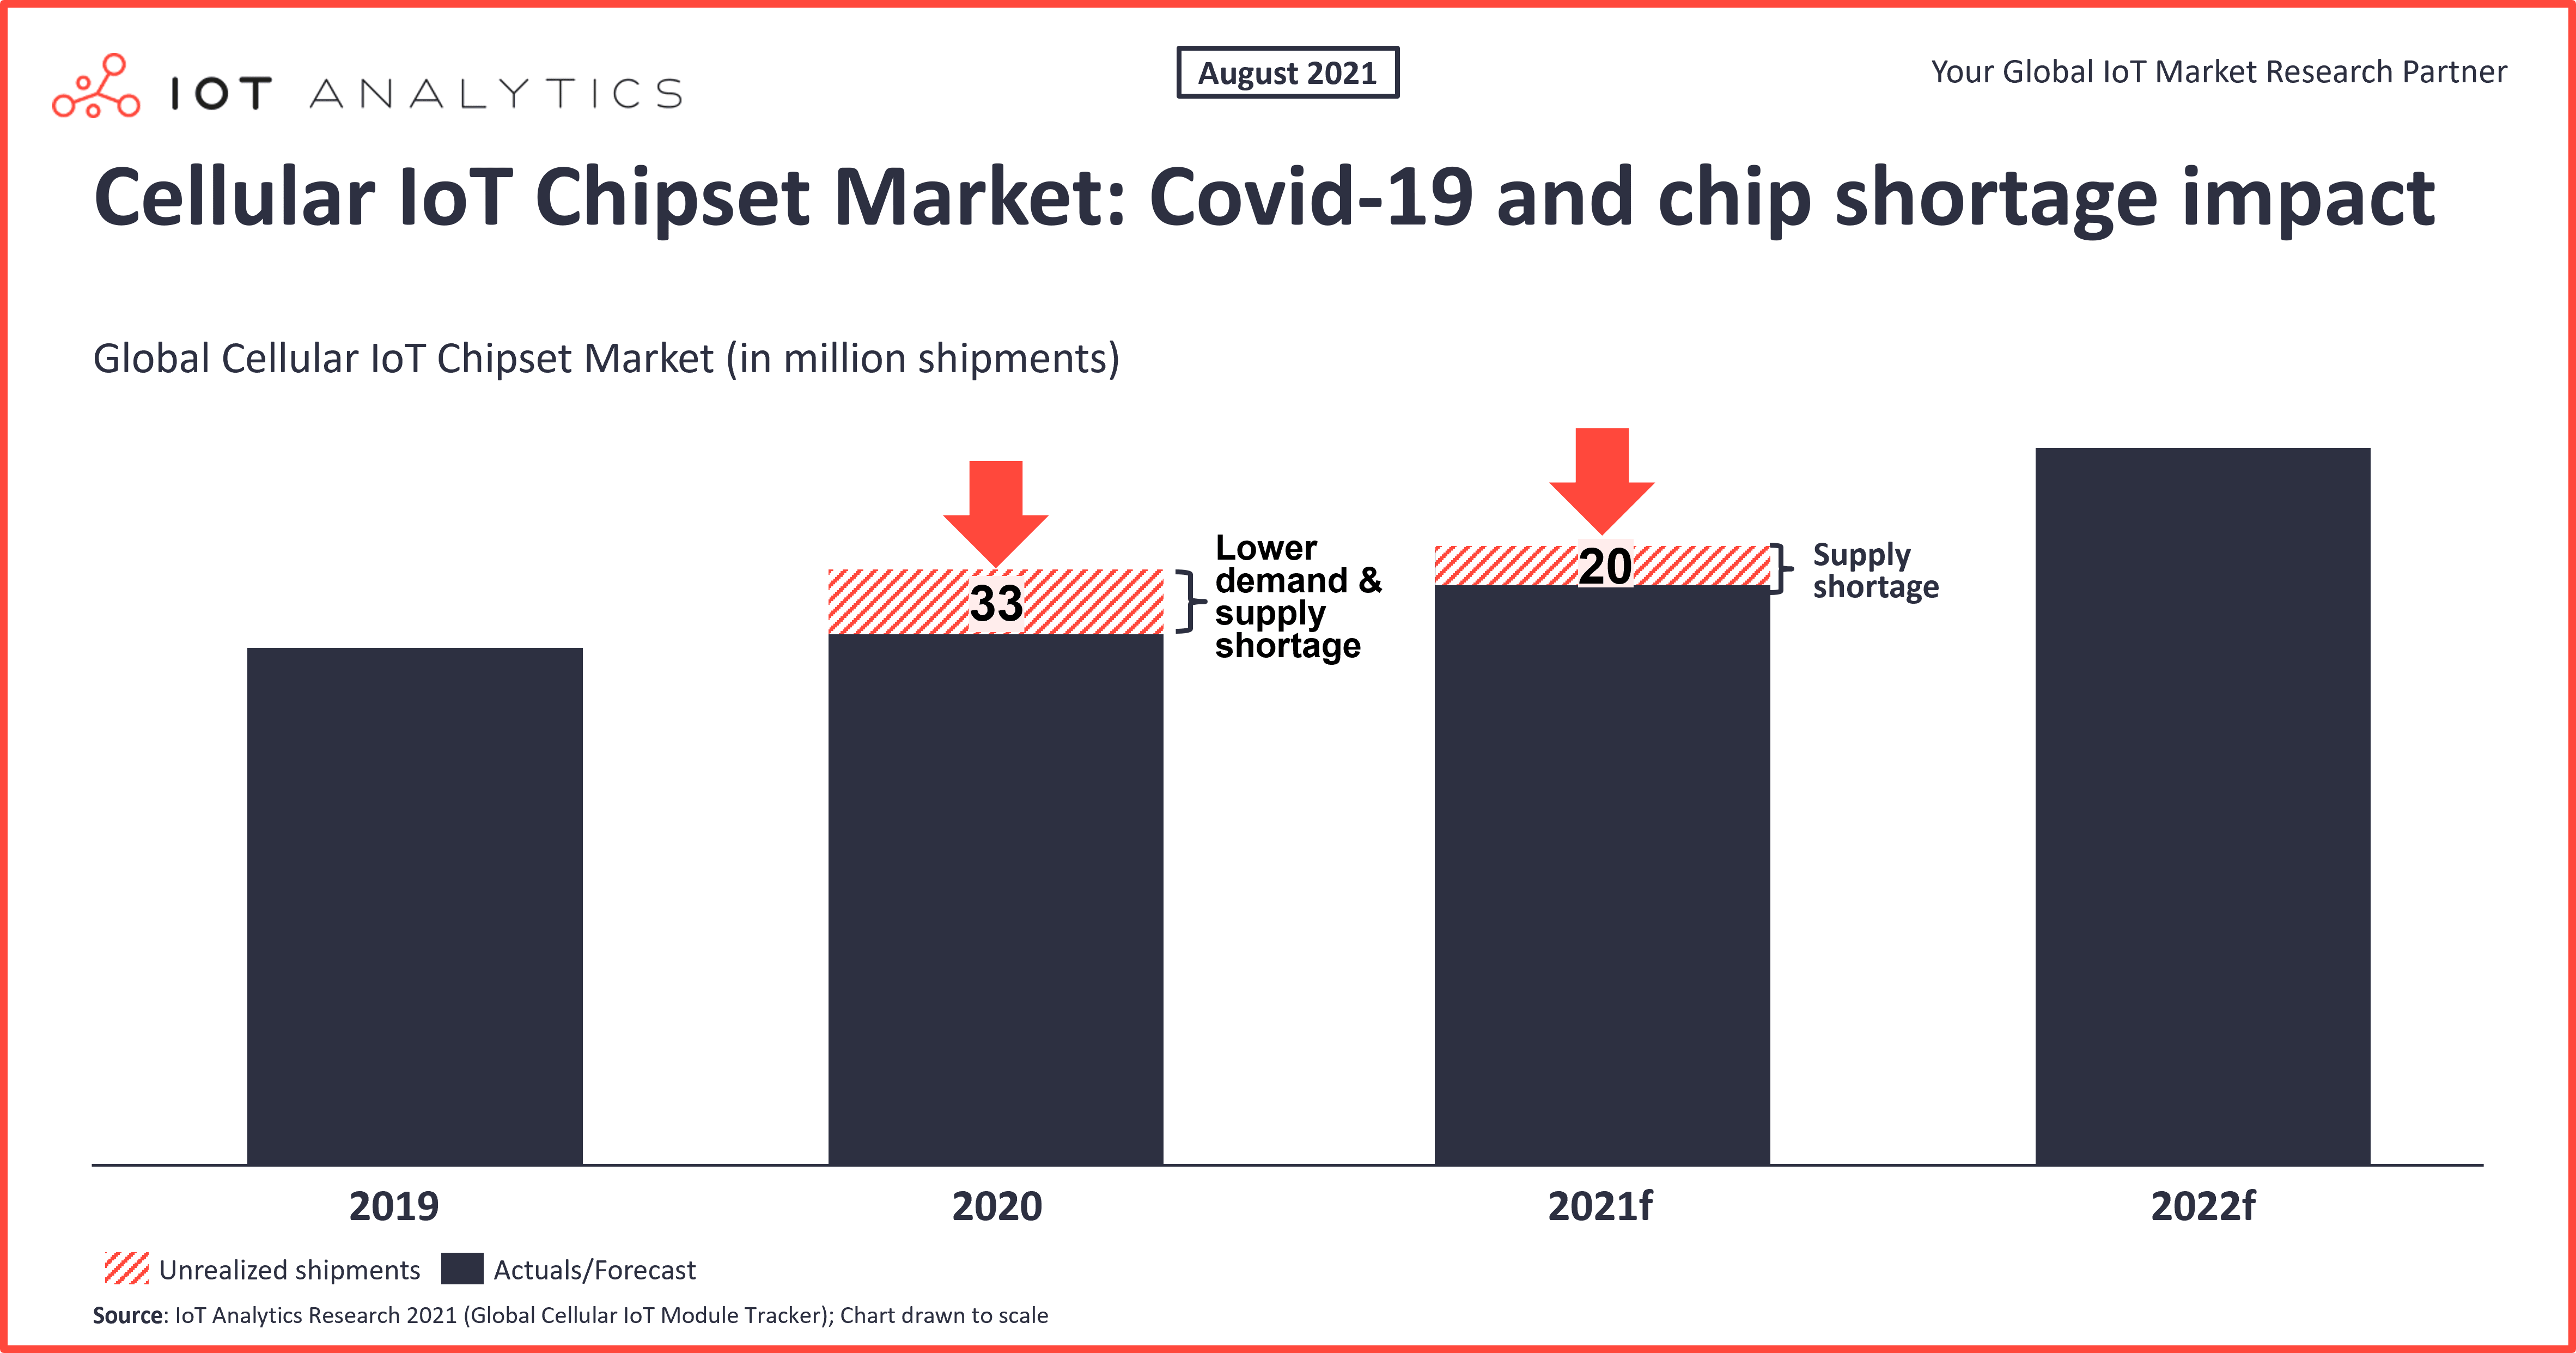 Cellular IoT Chipset Market - Covid-19 and chip shortage impact